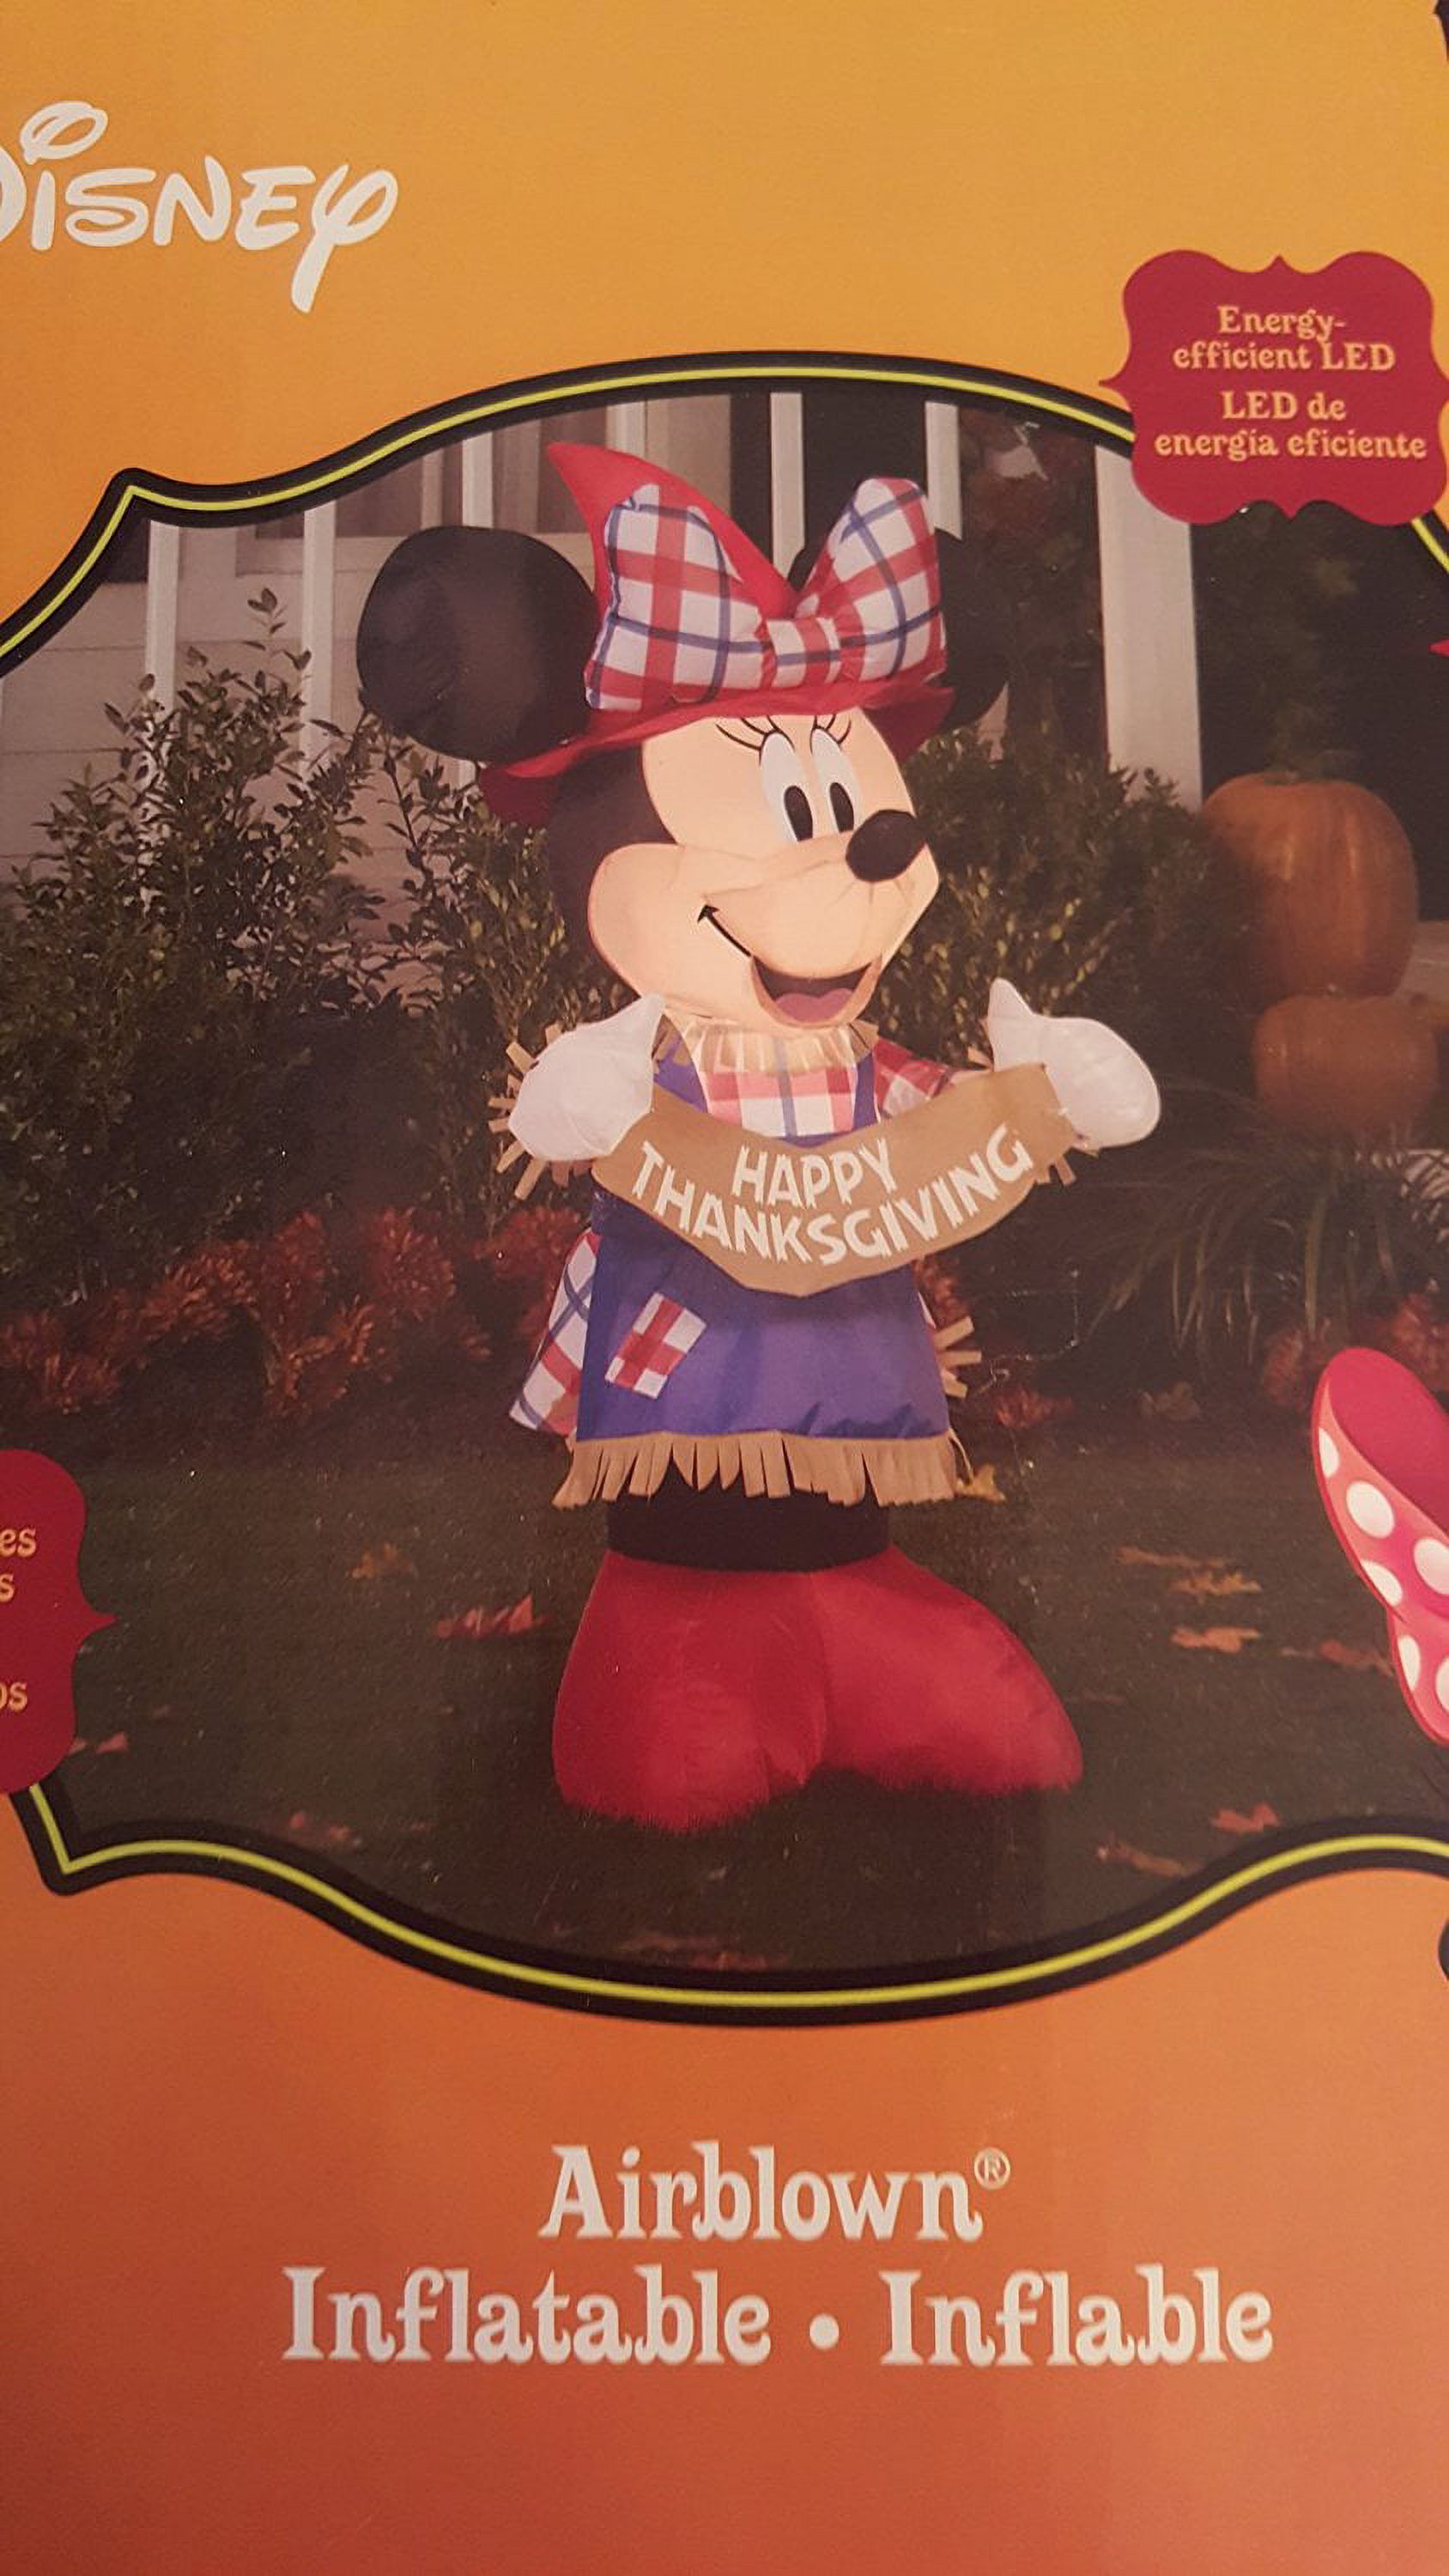 Minnie Mouse Scarecrow Airblown Inflatable Thanksgiving Yard Art Lawn Decoration - image 2 of 2